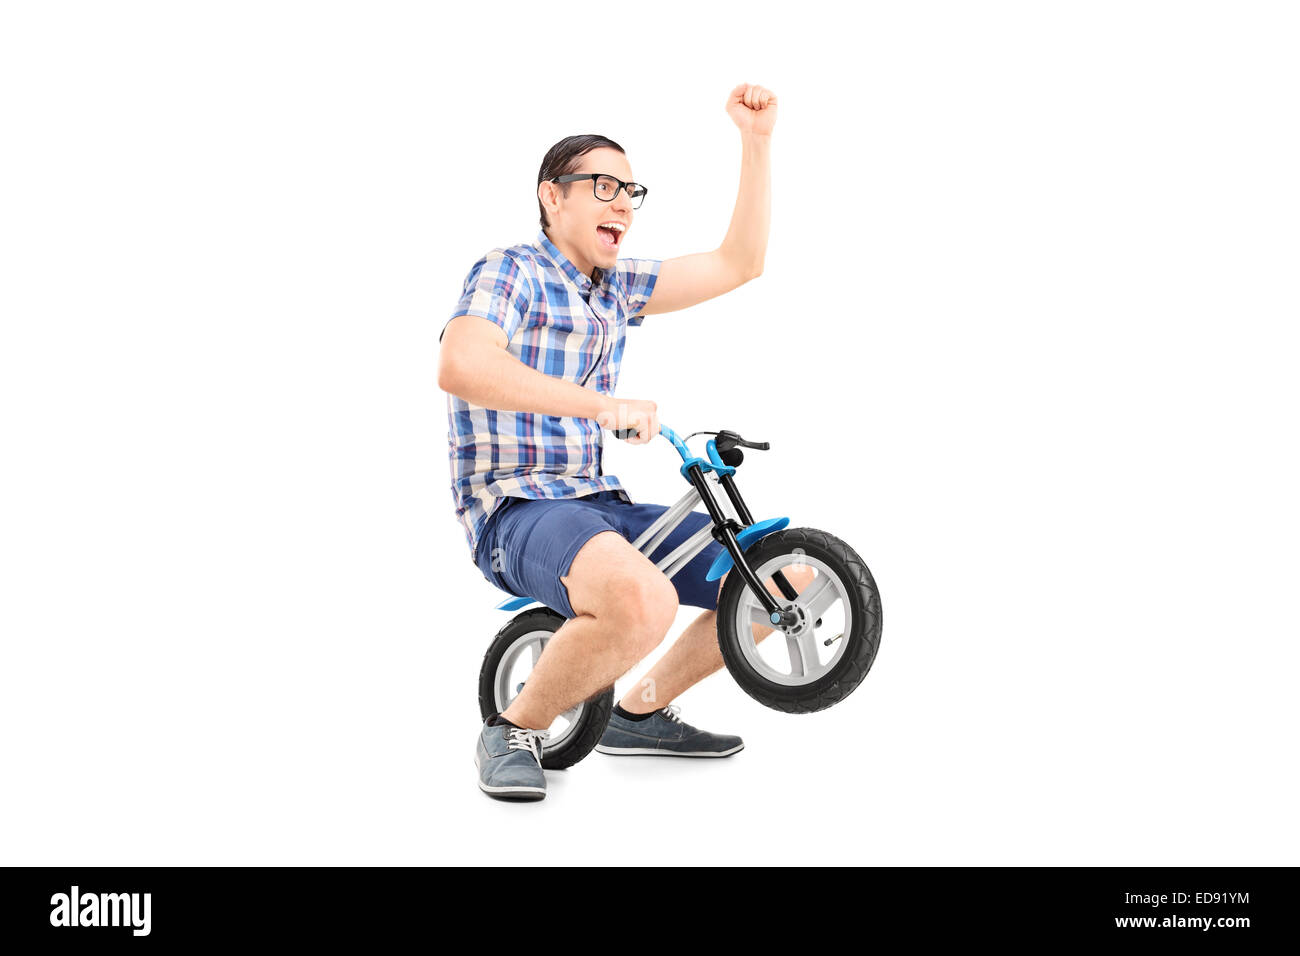 Crazy young man riding a small bike isolated on white background Stock Photo